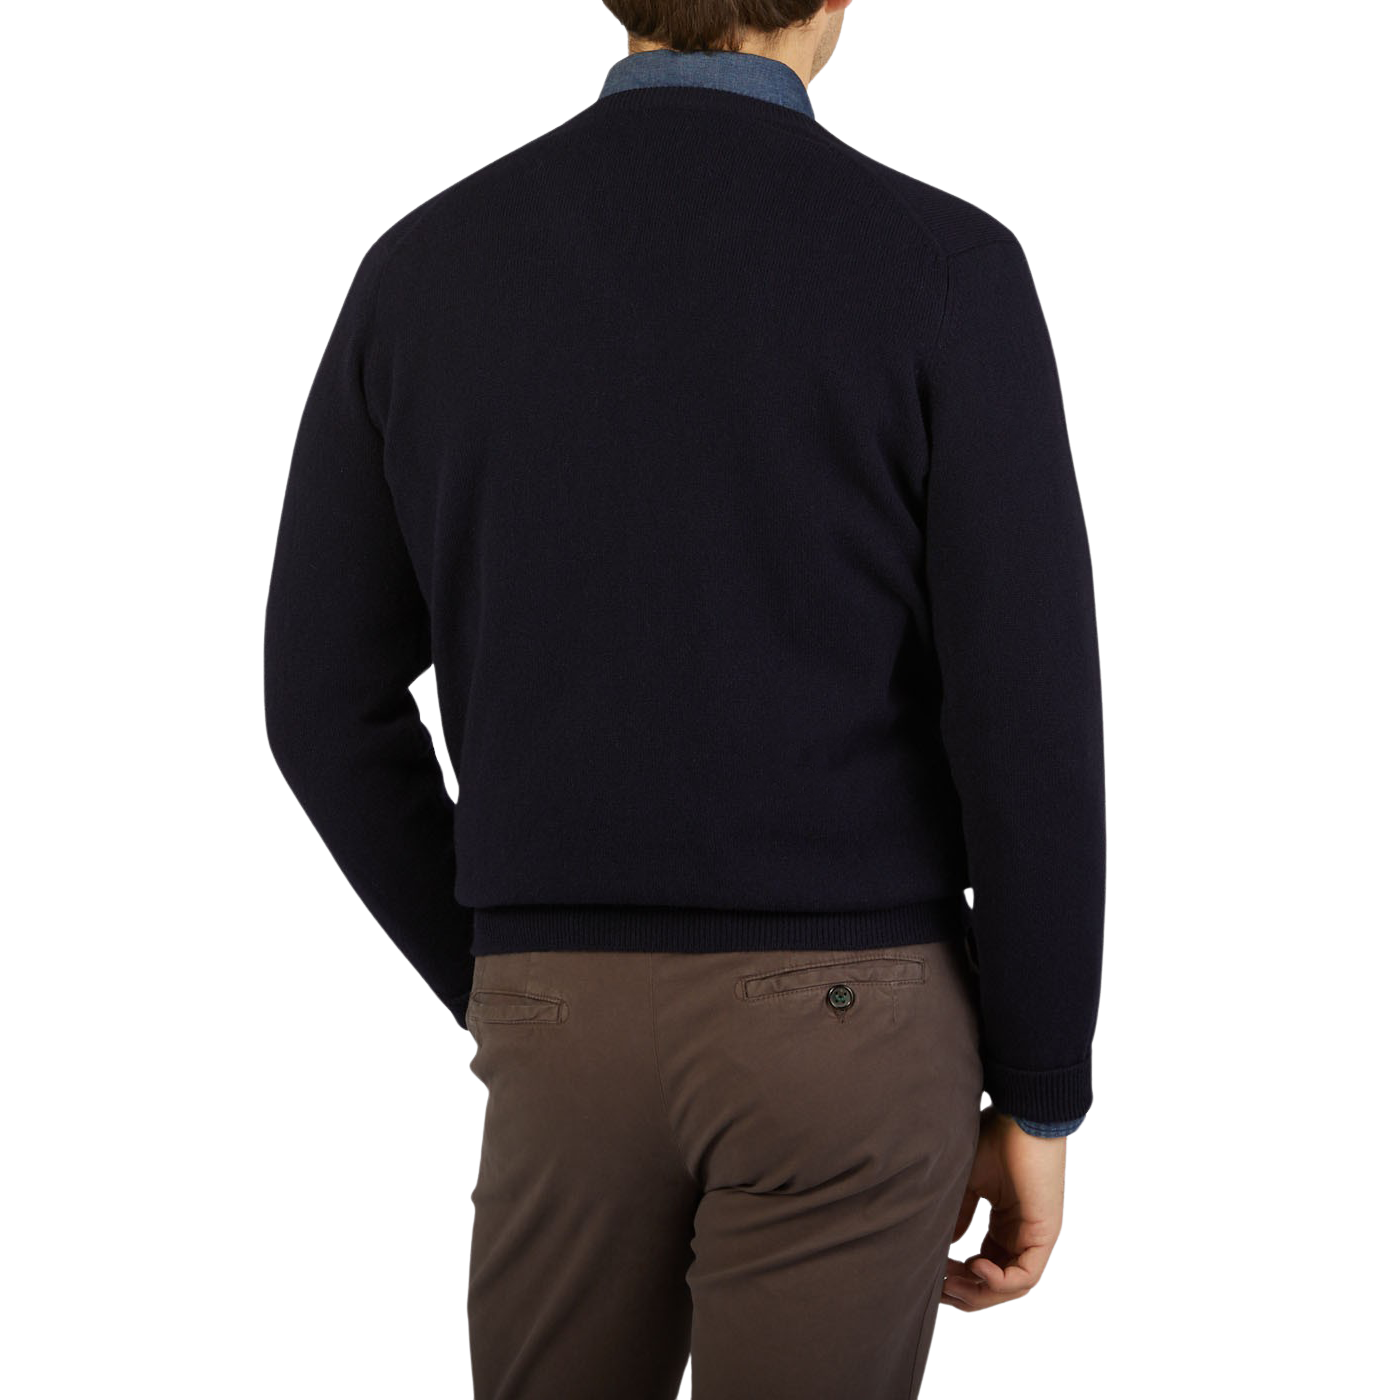 The back view of a man wearing a cozy William Lockie Dark Navy V-Neck Lambswool Sweater.